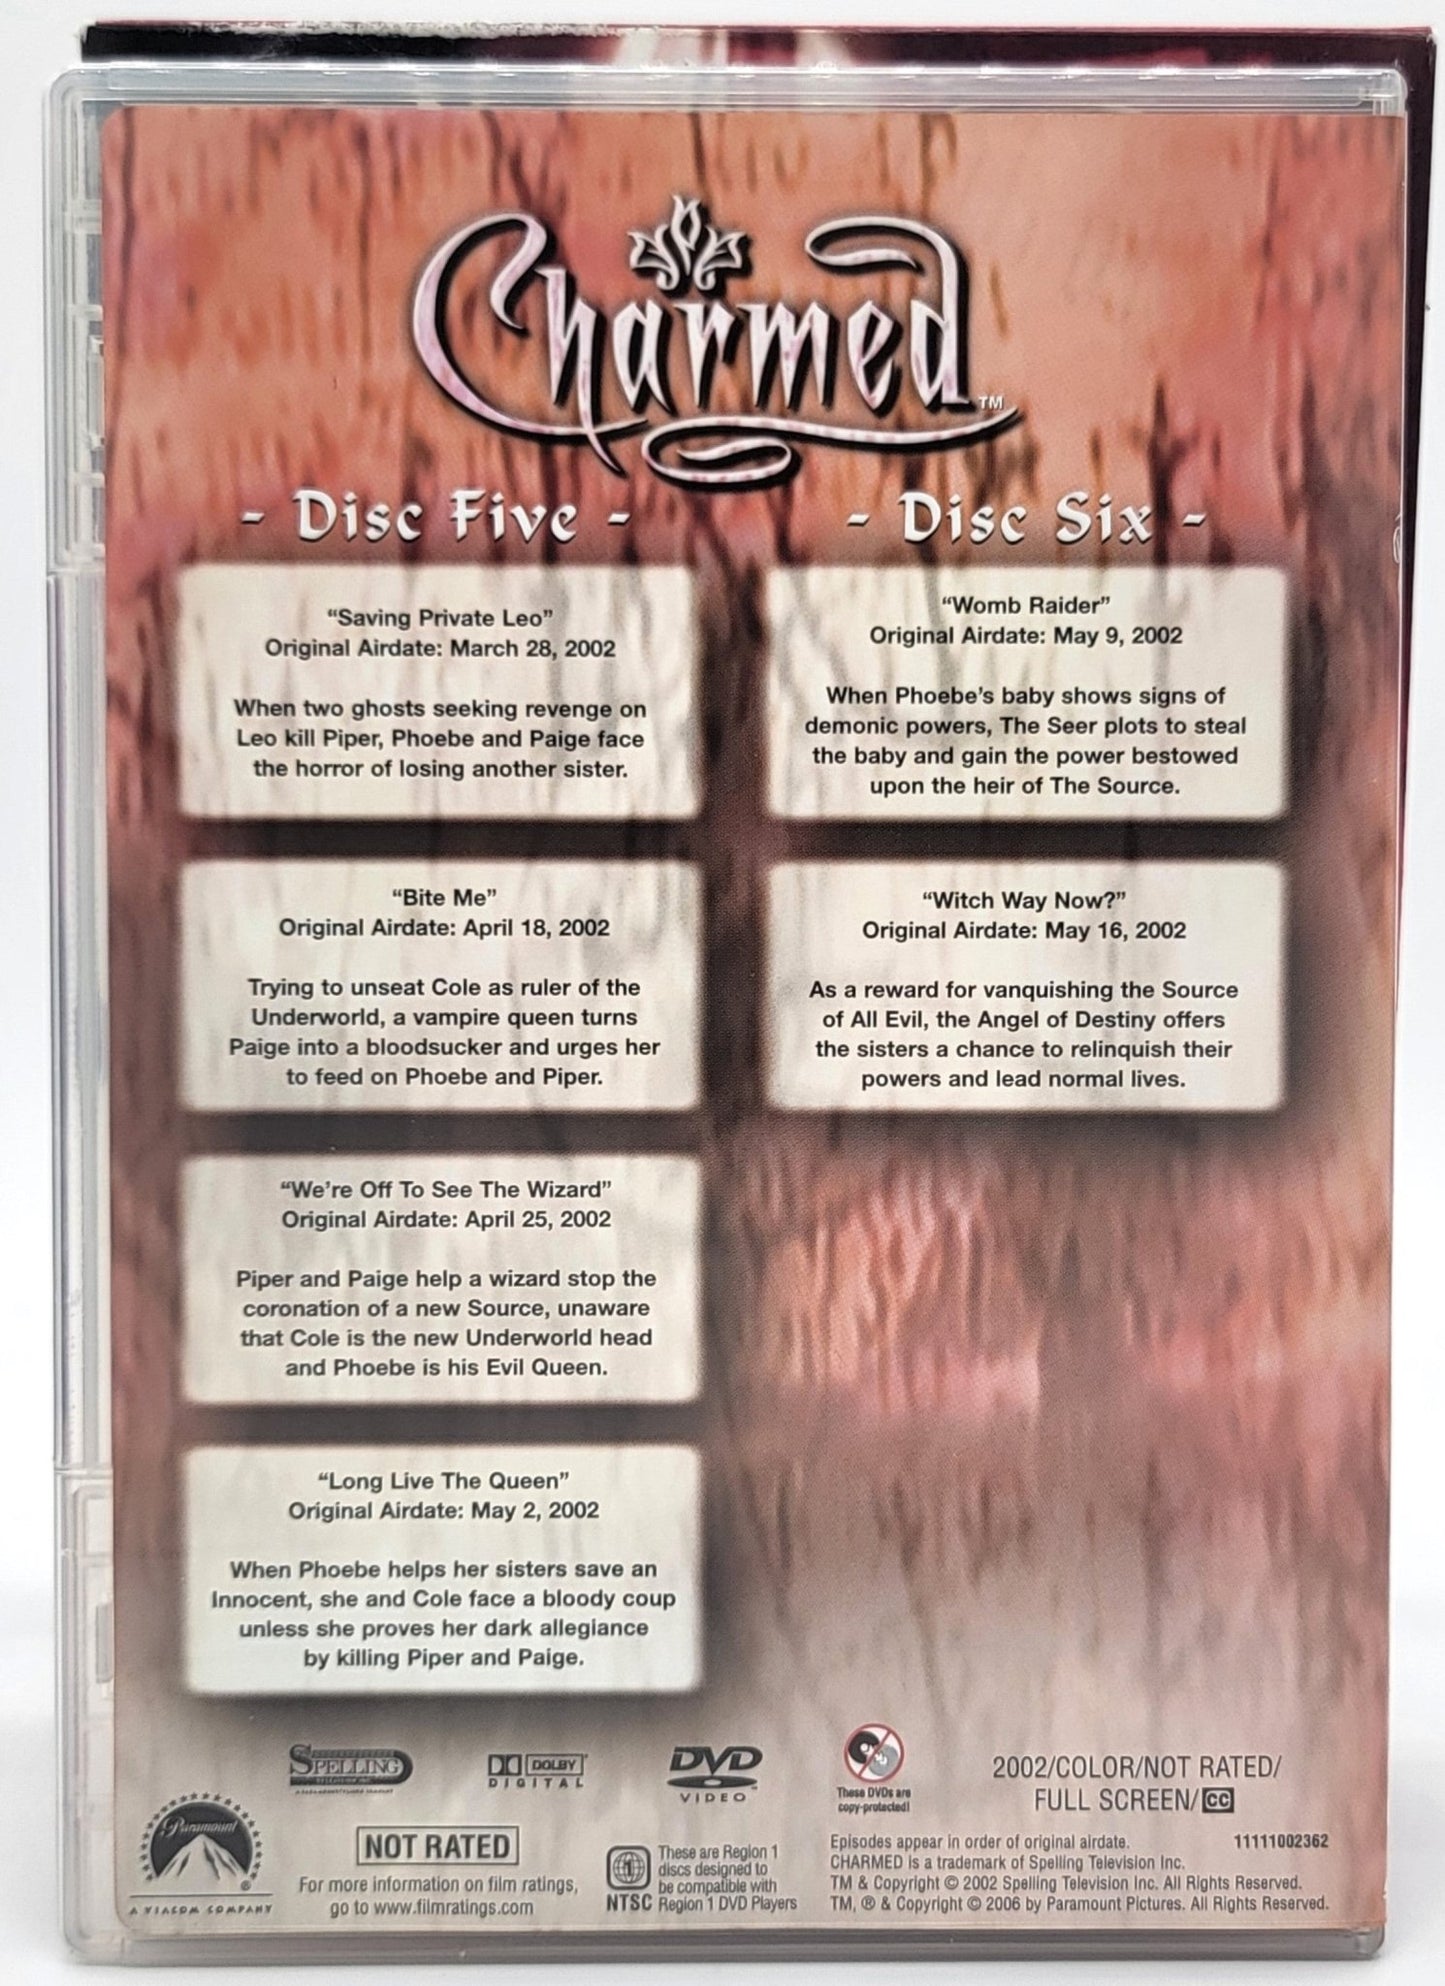 Paramount Pictures Home Entertainment - Charmed | DVD | The Complete Fourth Season - DVD - Steady Bunny Shop